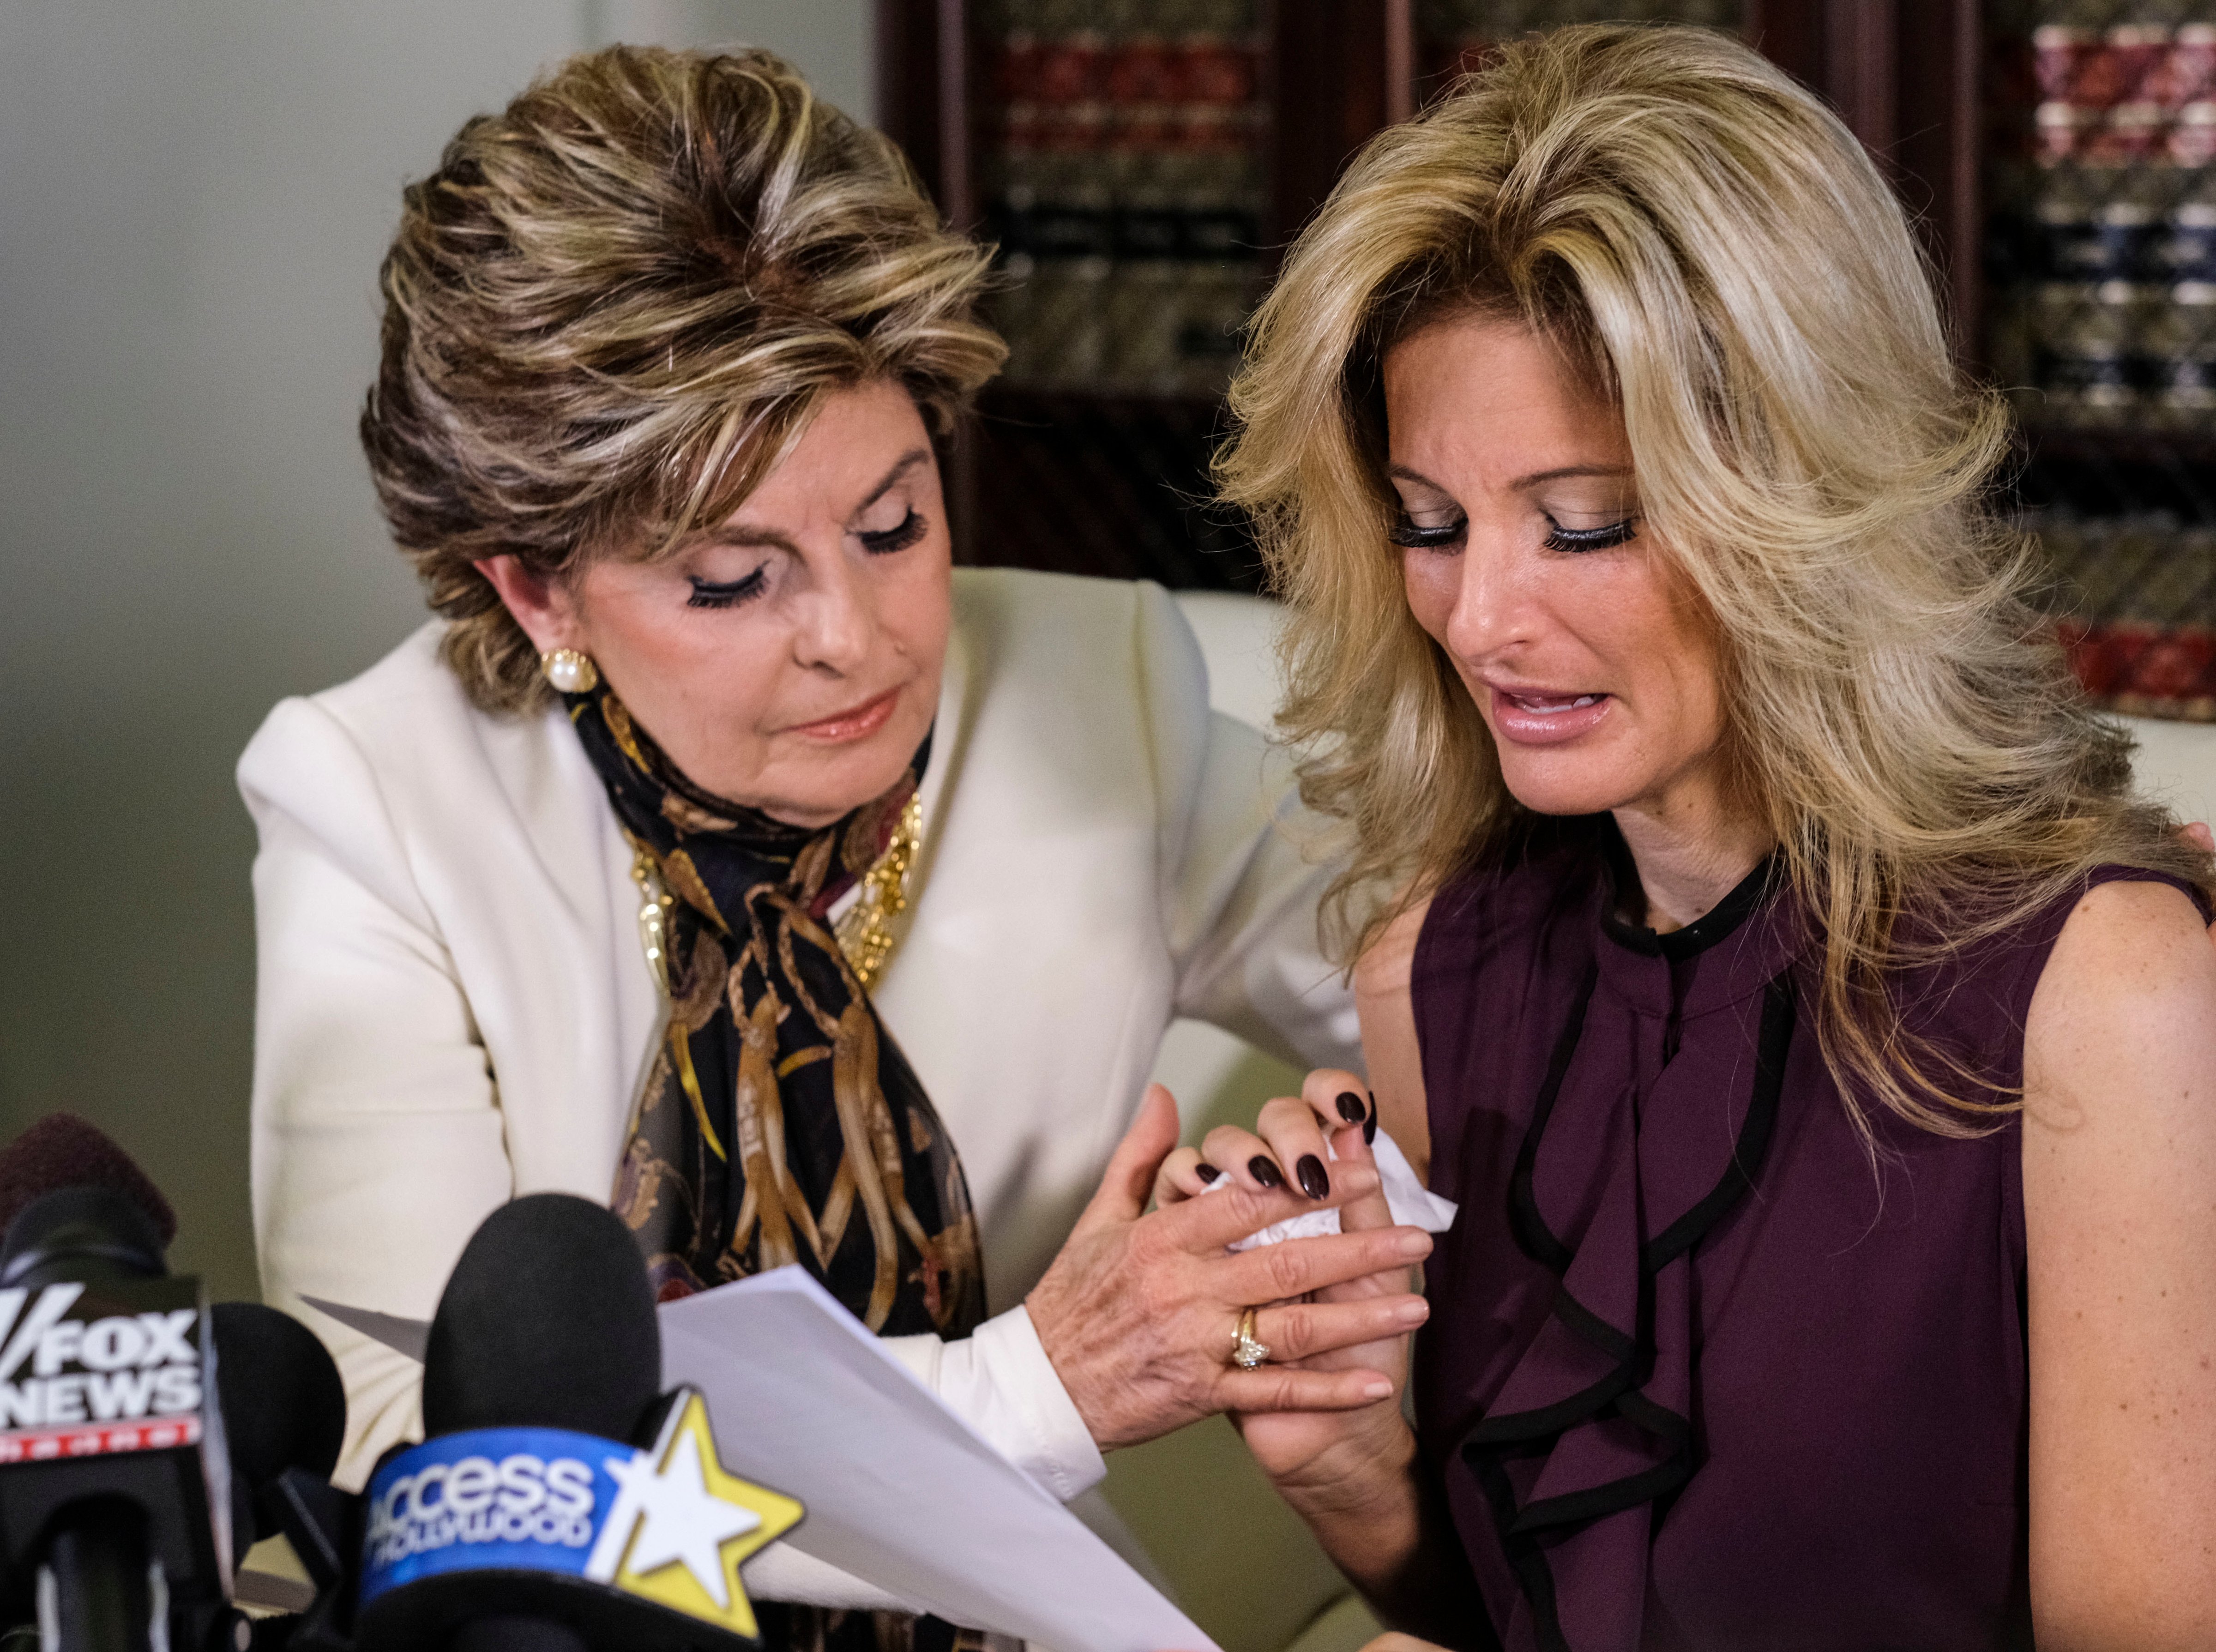 Attorney Gloria Allred, left, comforts Summer Zervos as Zervos, a former contestant on "The Apprentice," reads a statement during a news conference in Los Angeles on Oct. 14, 2016. (Ringo H.W. Chiu—AP)